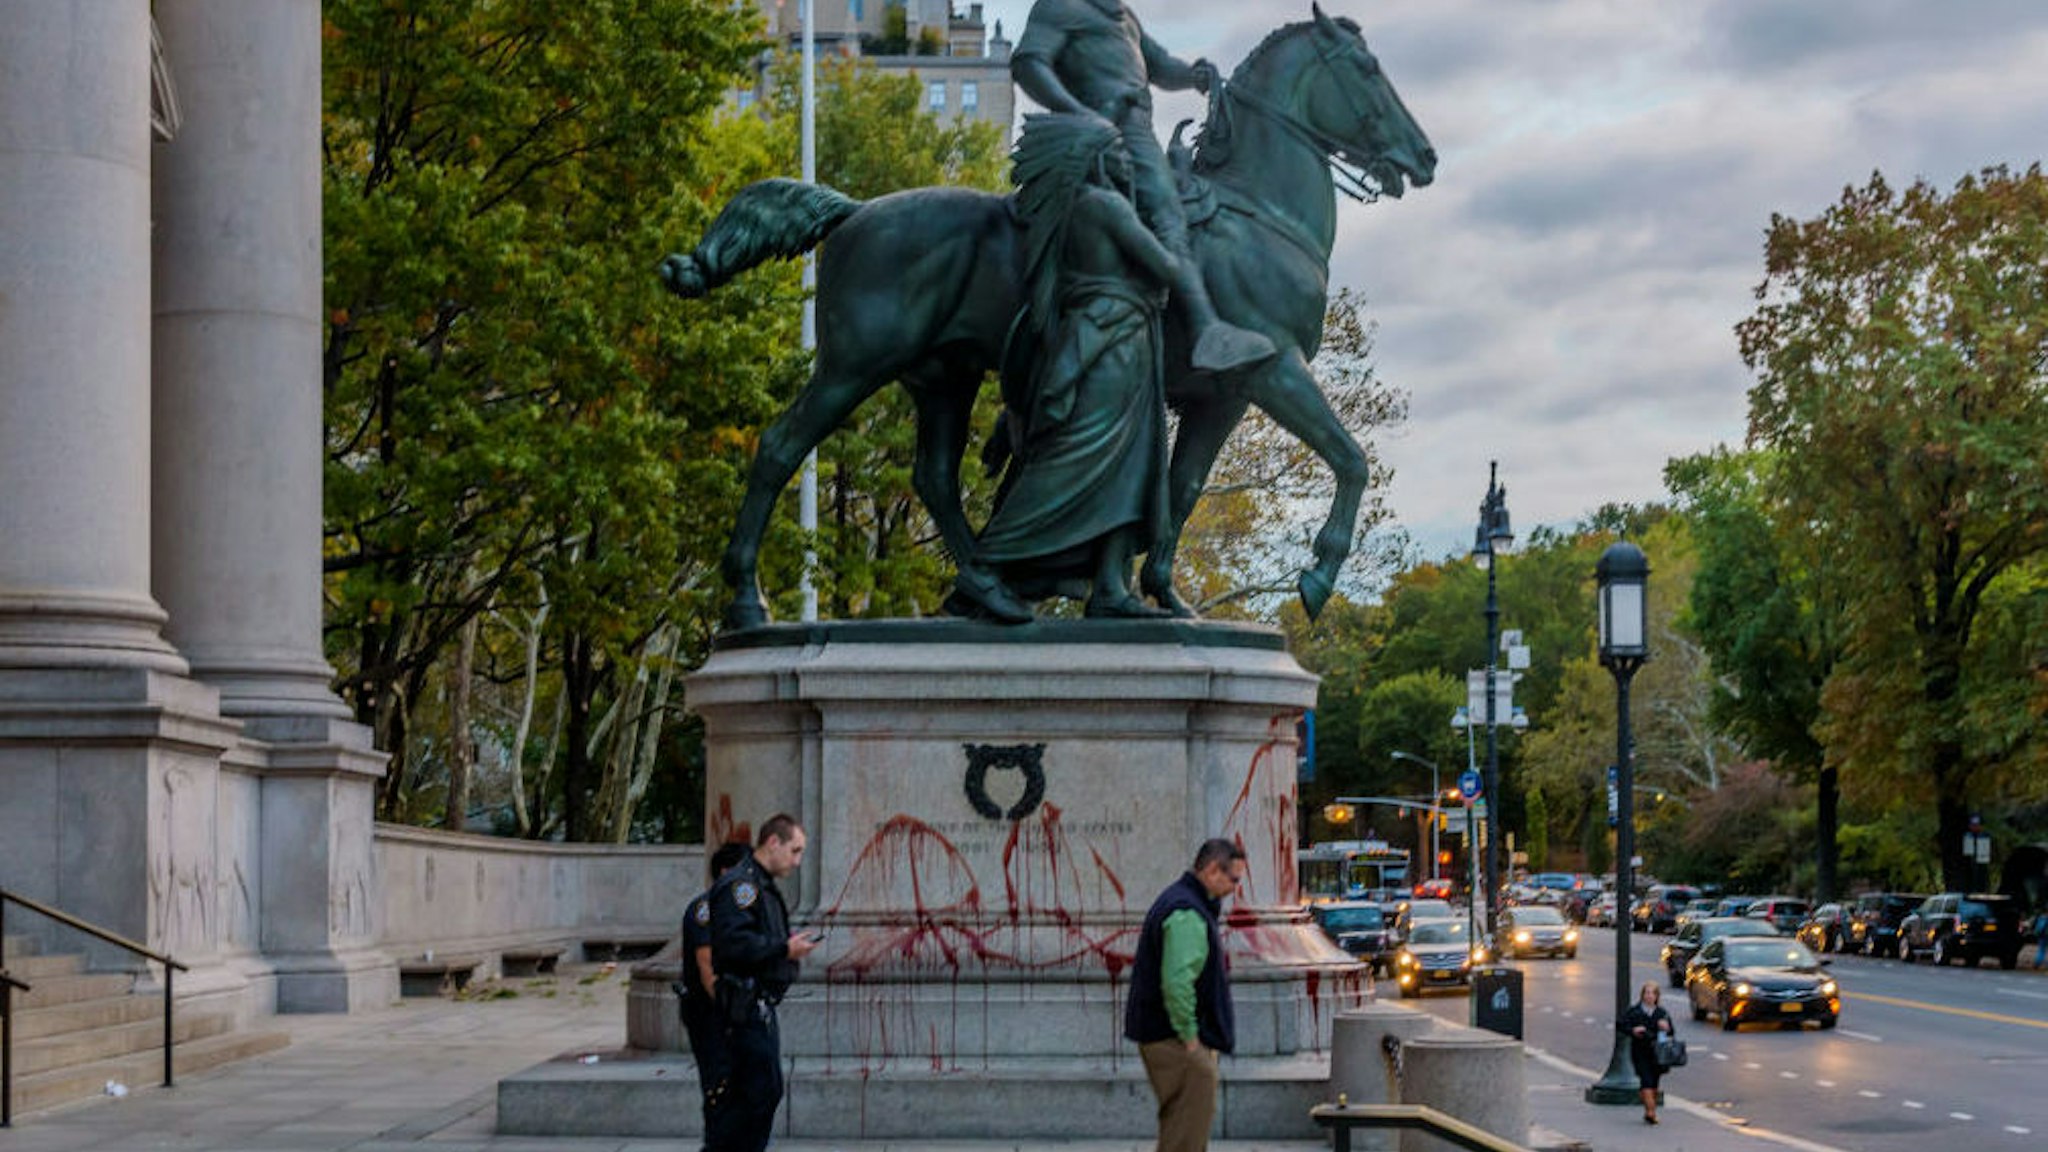 NYPD and museum security at the Roosevelt statue covered in "blood".